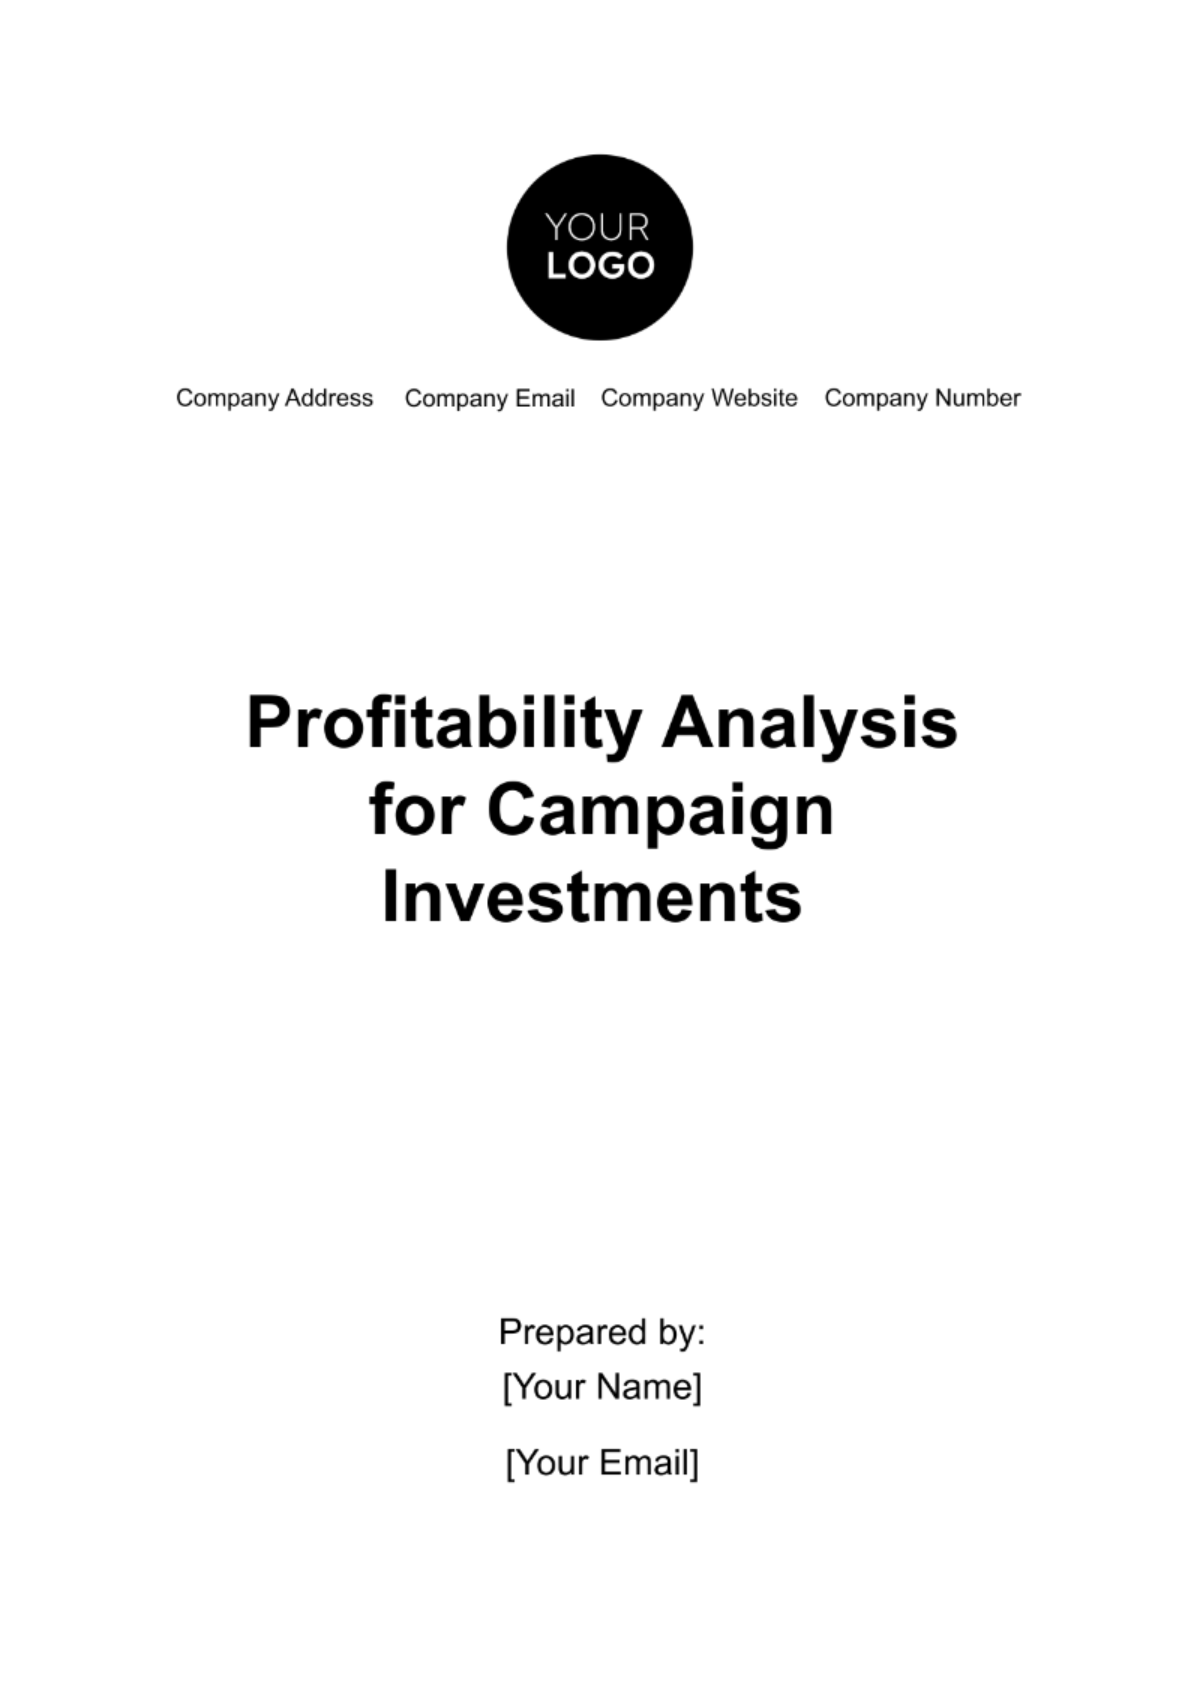 Profitability Analysis for Campaign Investments Template